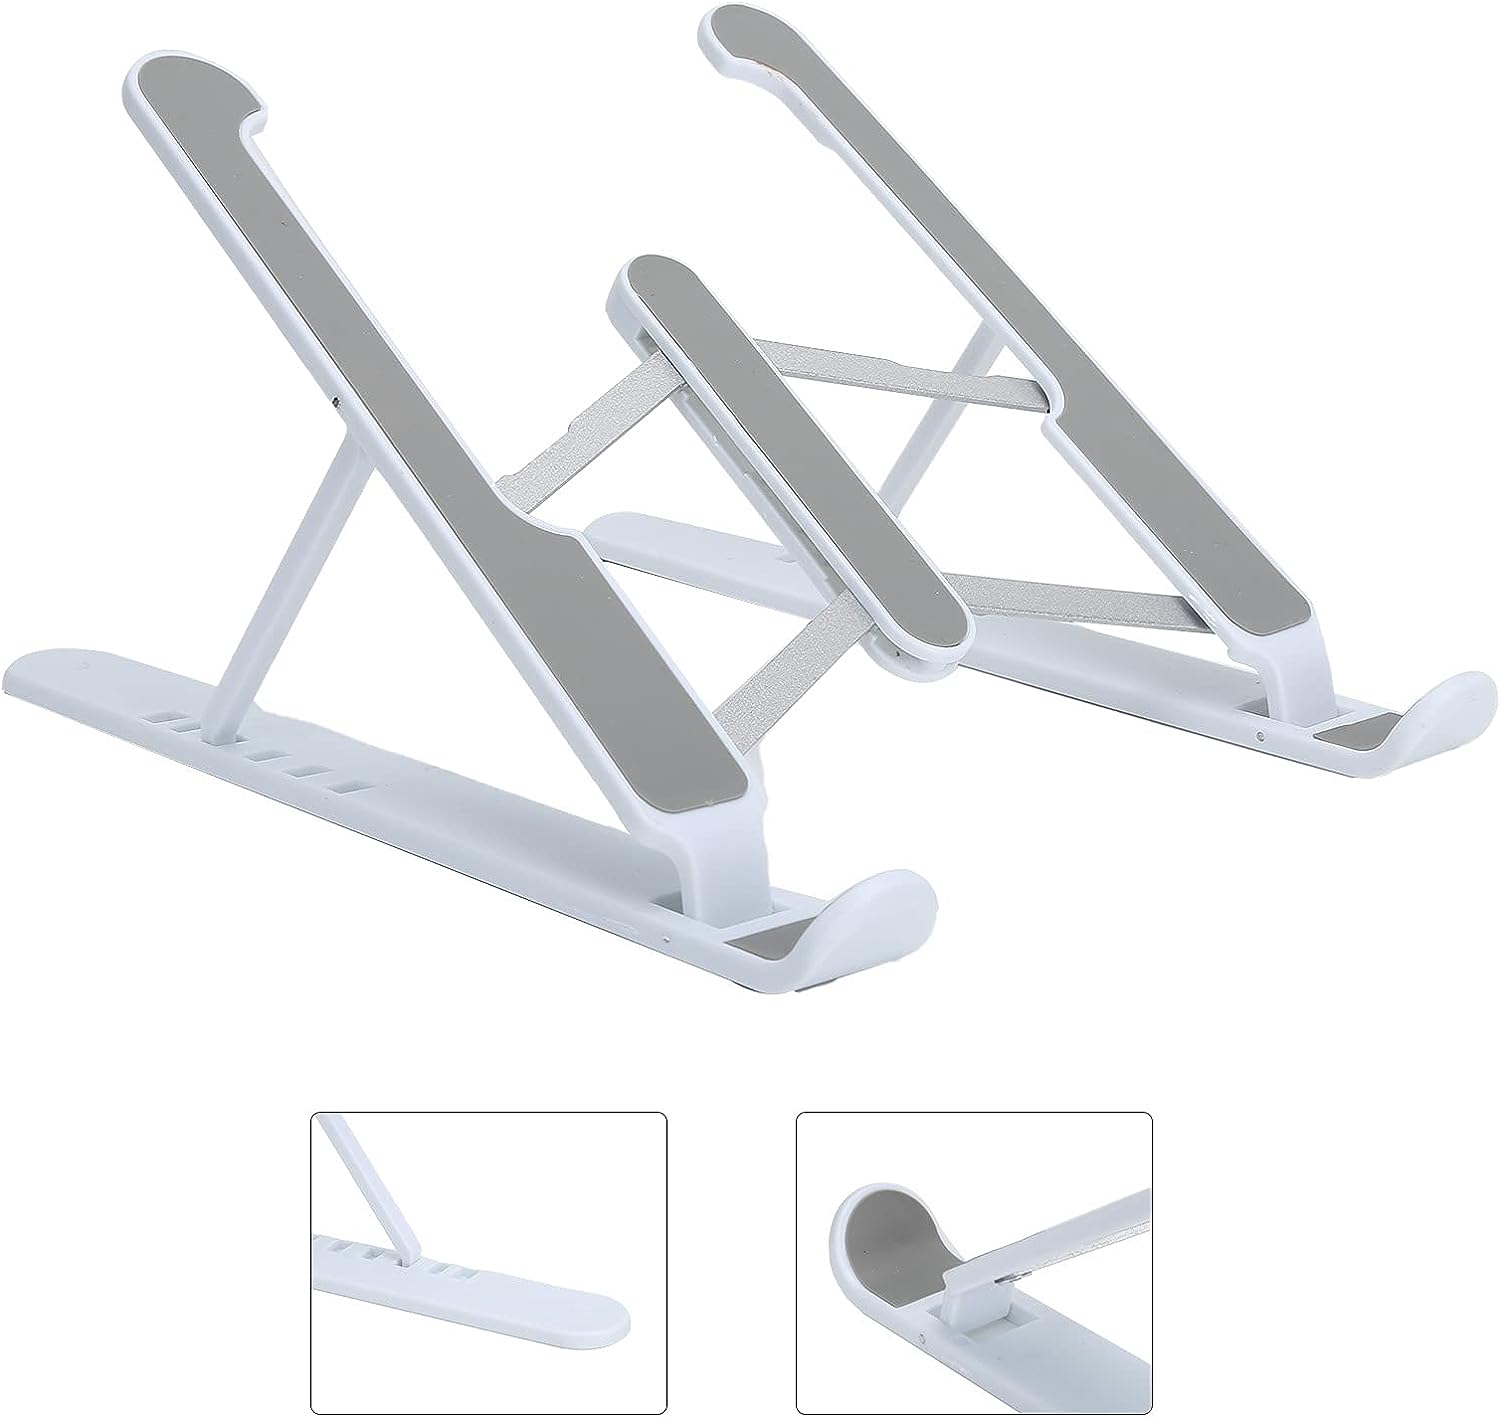 1320B ADJUSTABLE LAPTOP STAND HOLDER WITH BUILT-IN FOLDABLE LEGS AND HIGH QUALITY FIBRE